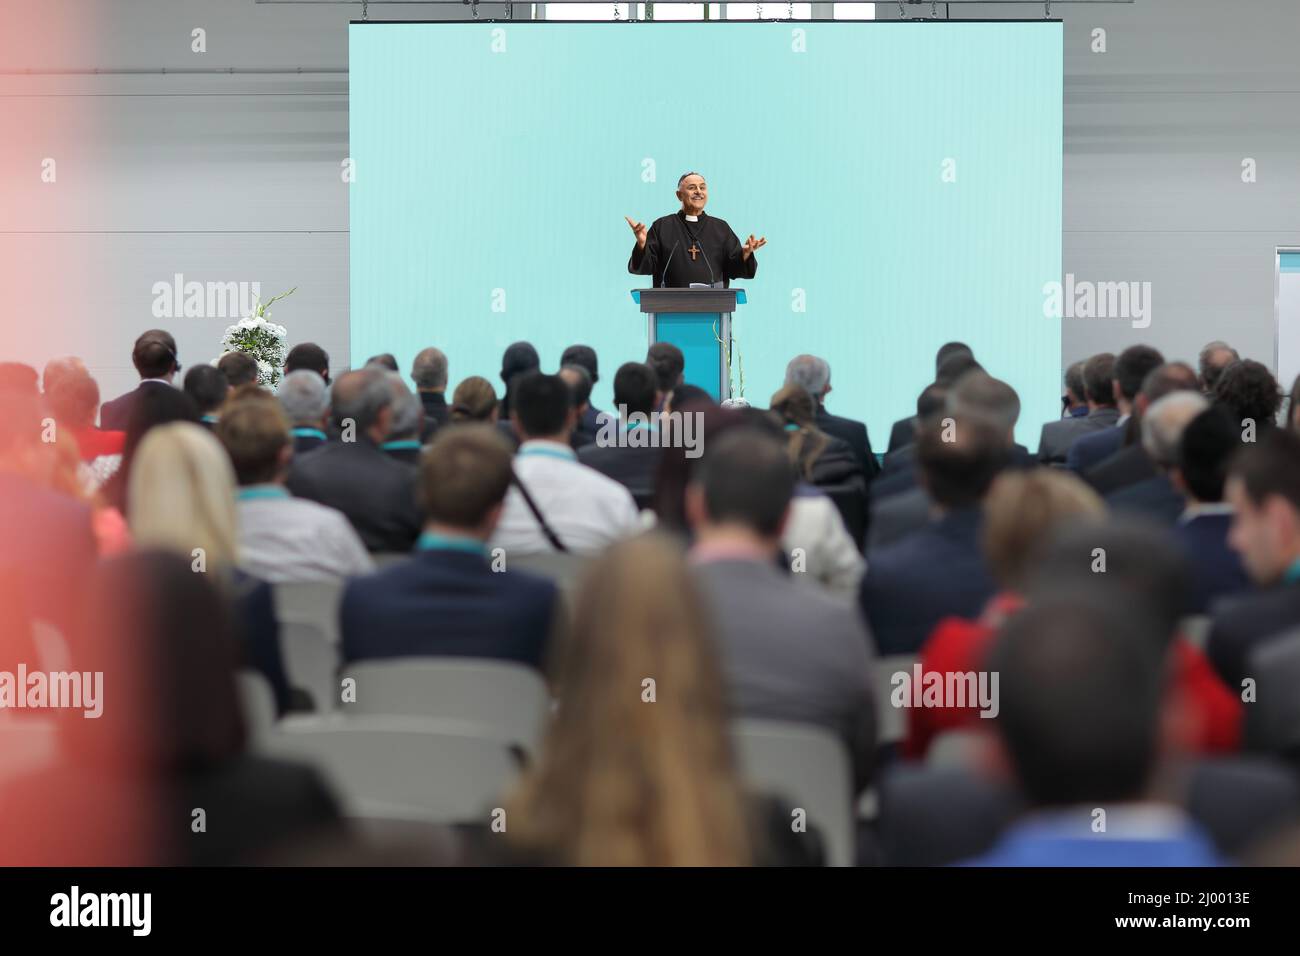 Priest talking on a speaker podium in front of audience inside a hall Stock Photo